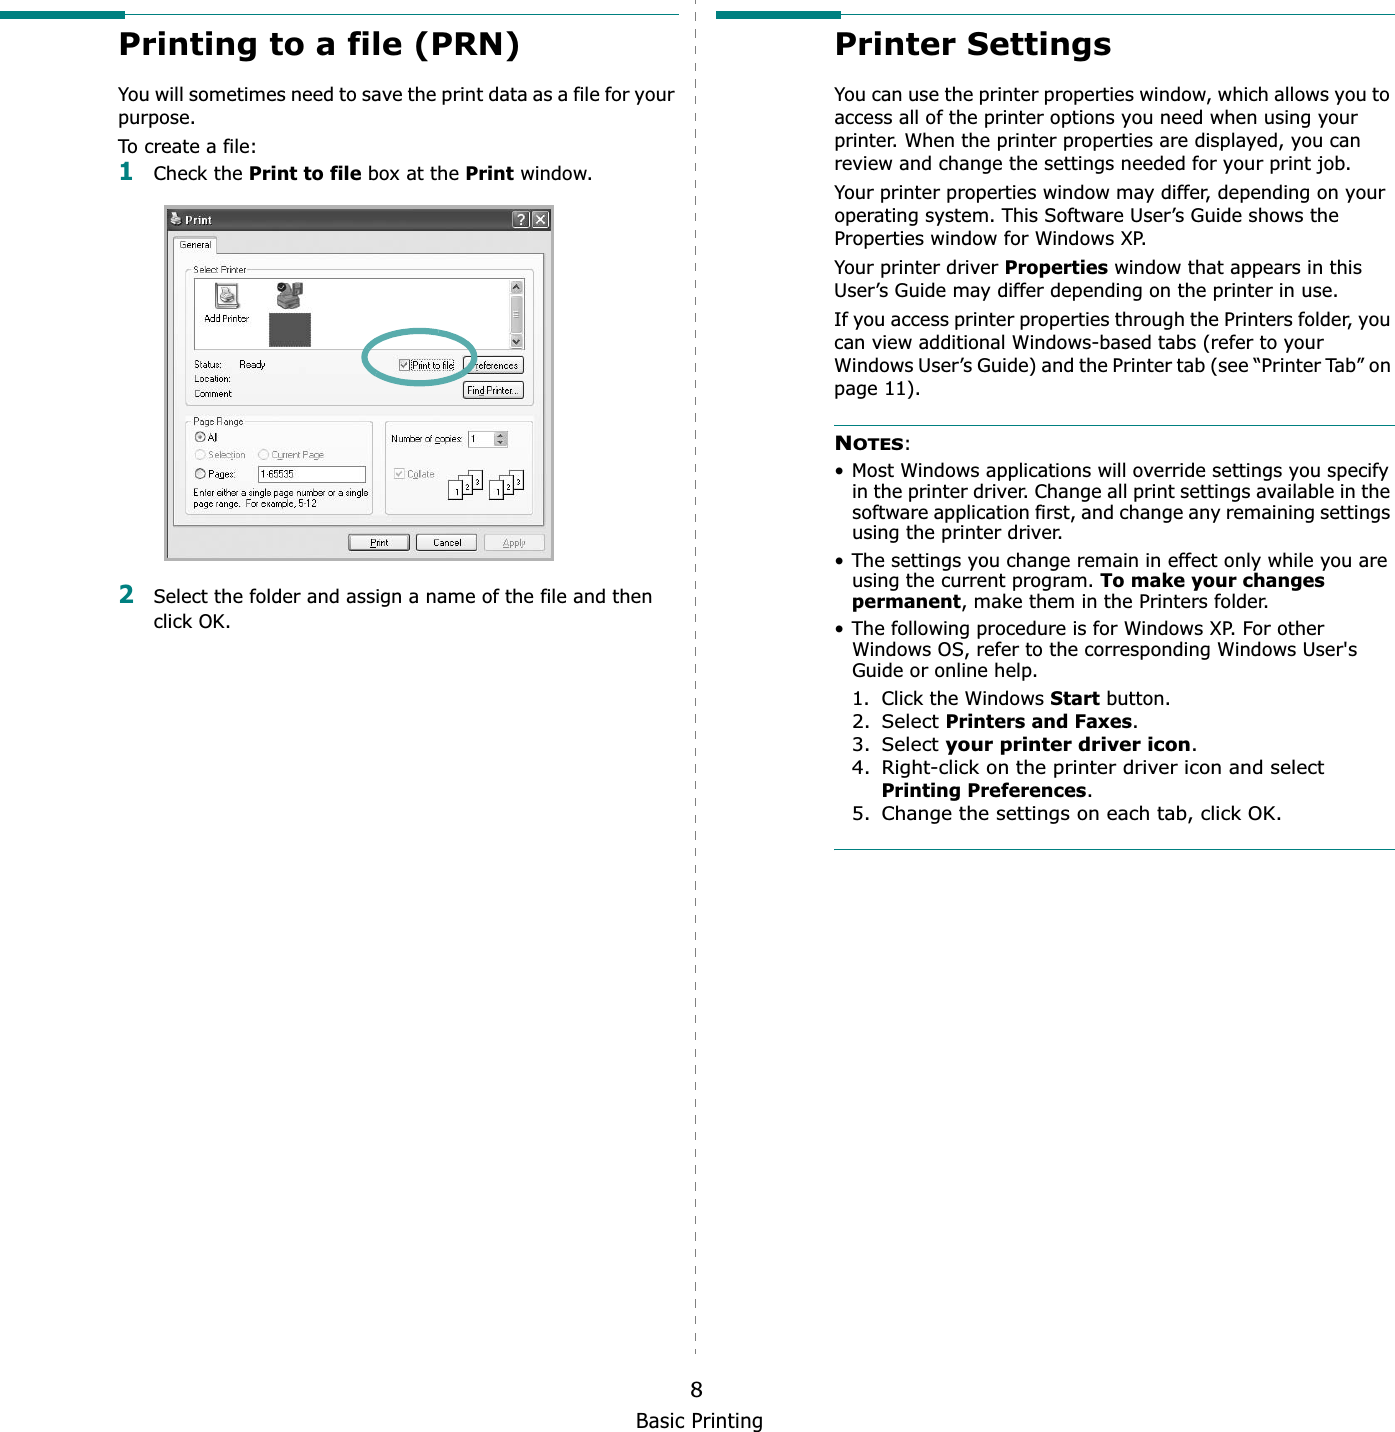 Basic Printing8Printing to a file (PRN)  You will sometimes need to save the print data as a file for your purpose. To create a file:1Check the Print to file box at the Print window.2Select the folder and assign a name of the file and then click OK.Printer SettingsYou can use the printer properties window, which allows you to access all of the printer options you need when using your printer. When the printer properties are displayed, you can review and change the settings needed for your print job. Your printer properties window may differ, depending on your operating system. This Software User’s Guide shows the Properties window for Windows XP.Your printer driver Properties window that appears in this User’s Guide may differ depending on the printer in use.If you access printer properties through the Printers folder, you can view additional Windows-based tabs (refer to your Windows User’s Guide) and the Printer tab (see “Printer Tab” on page 11).NOTES:• Most Windows applications will override settings you specify in the printer driver. Change all print settings available in the software application first, and change any remaining settings using the printer driver. • The settings you change remain in effect only while you are using the current program. To make your changes permanent, make them in the Printers folder. • The following procedure is for Windows XP. For other Windows OS, refer to the corresponding Windows User&apos;s Guide or online help.1. Click the Windows Start button.2. Select Printers and Faxes.3. Select your printer driver icon.4. Right-click on the printer driver icon and select Printing Preferences.5. Change the settings on each tab, click OK.